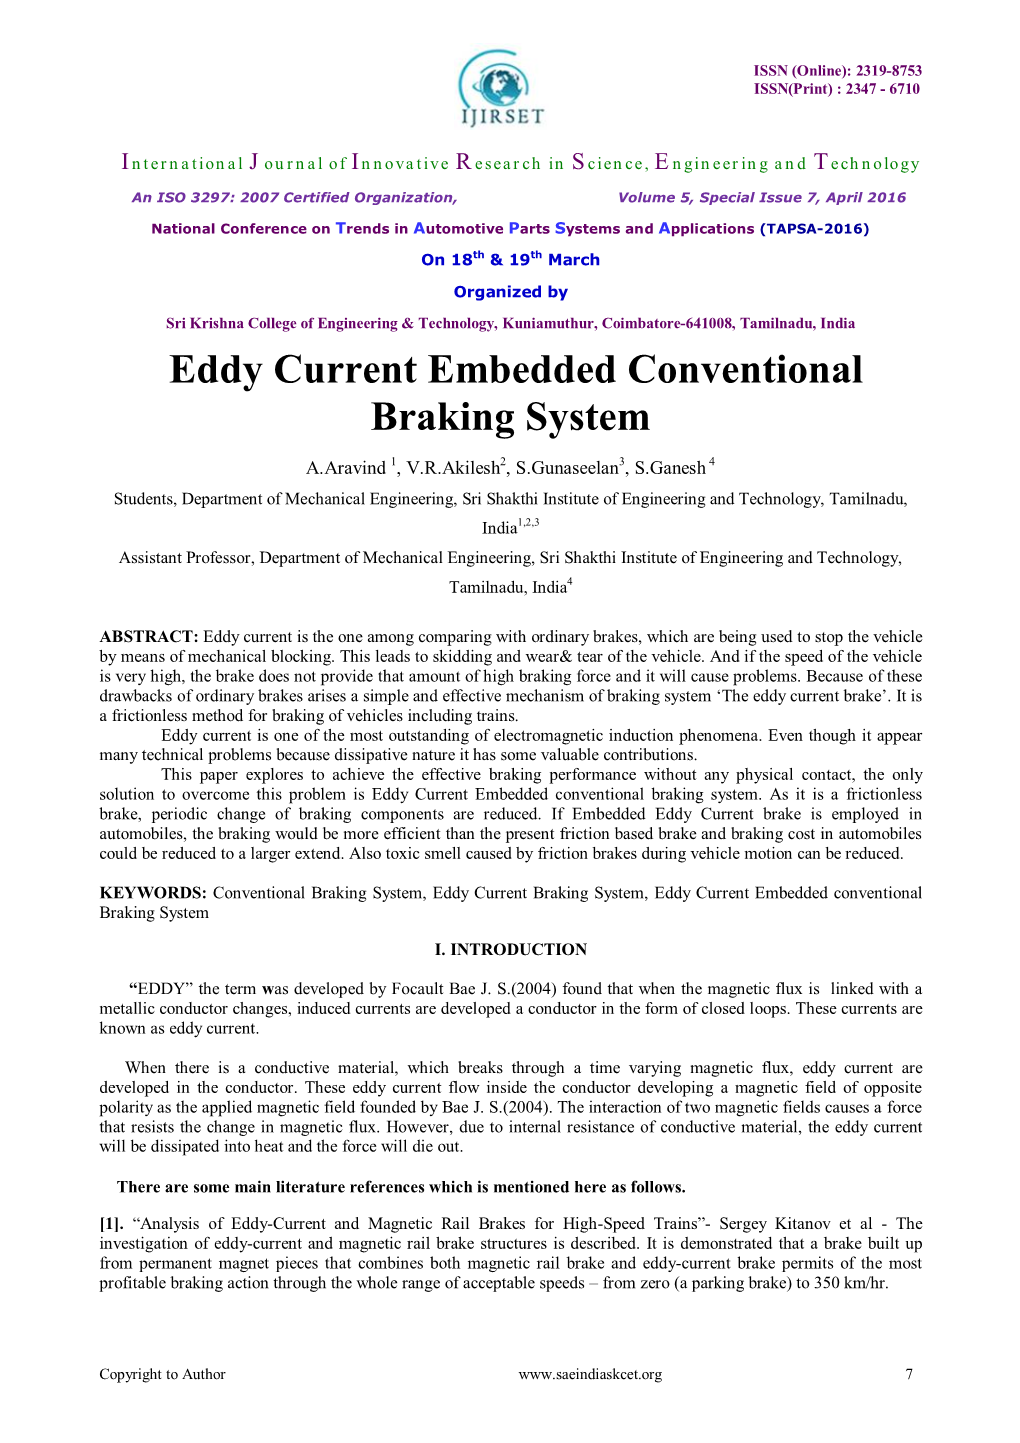 Eddy Current Embedded Conventional Braking System